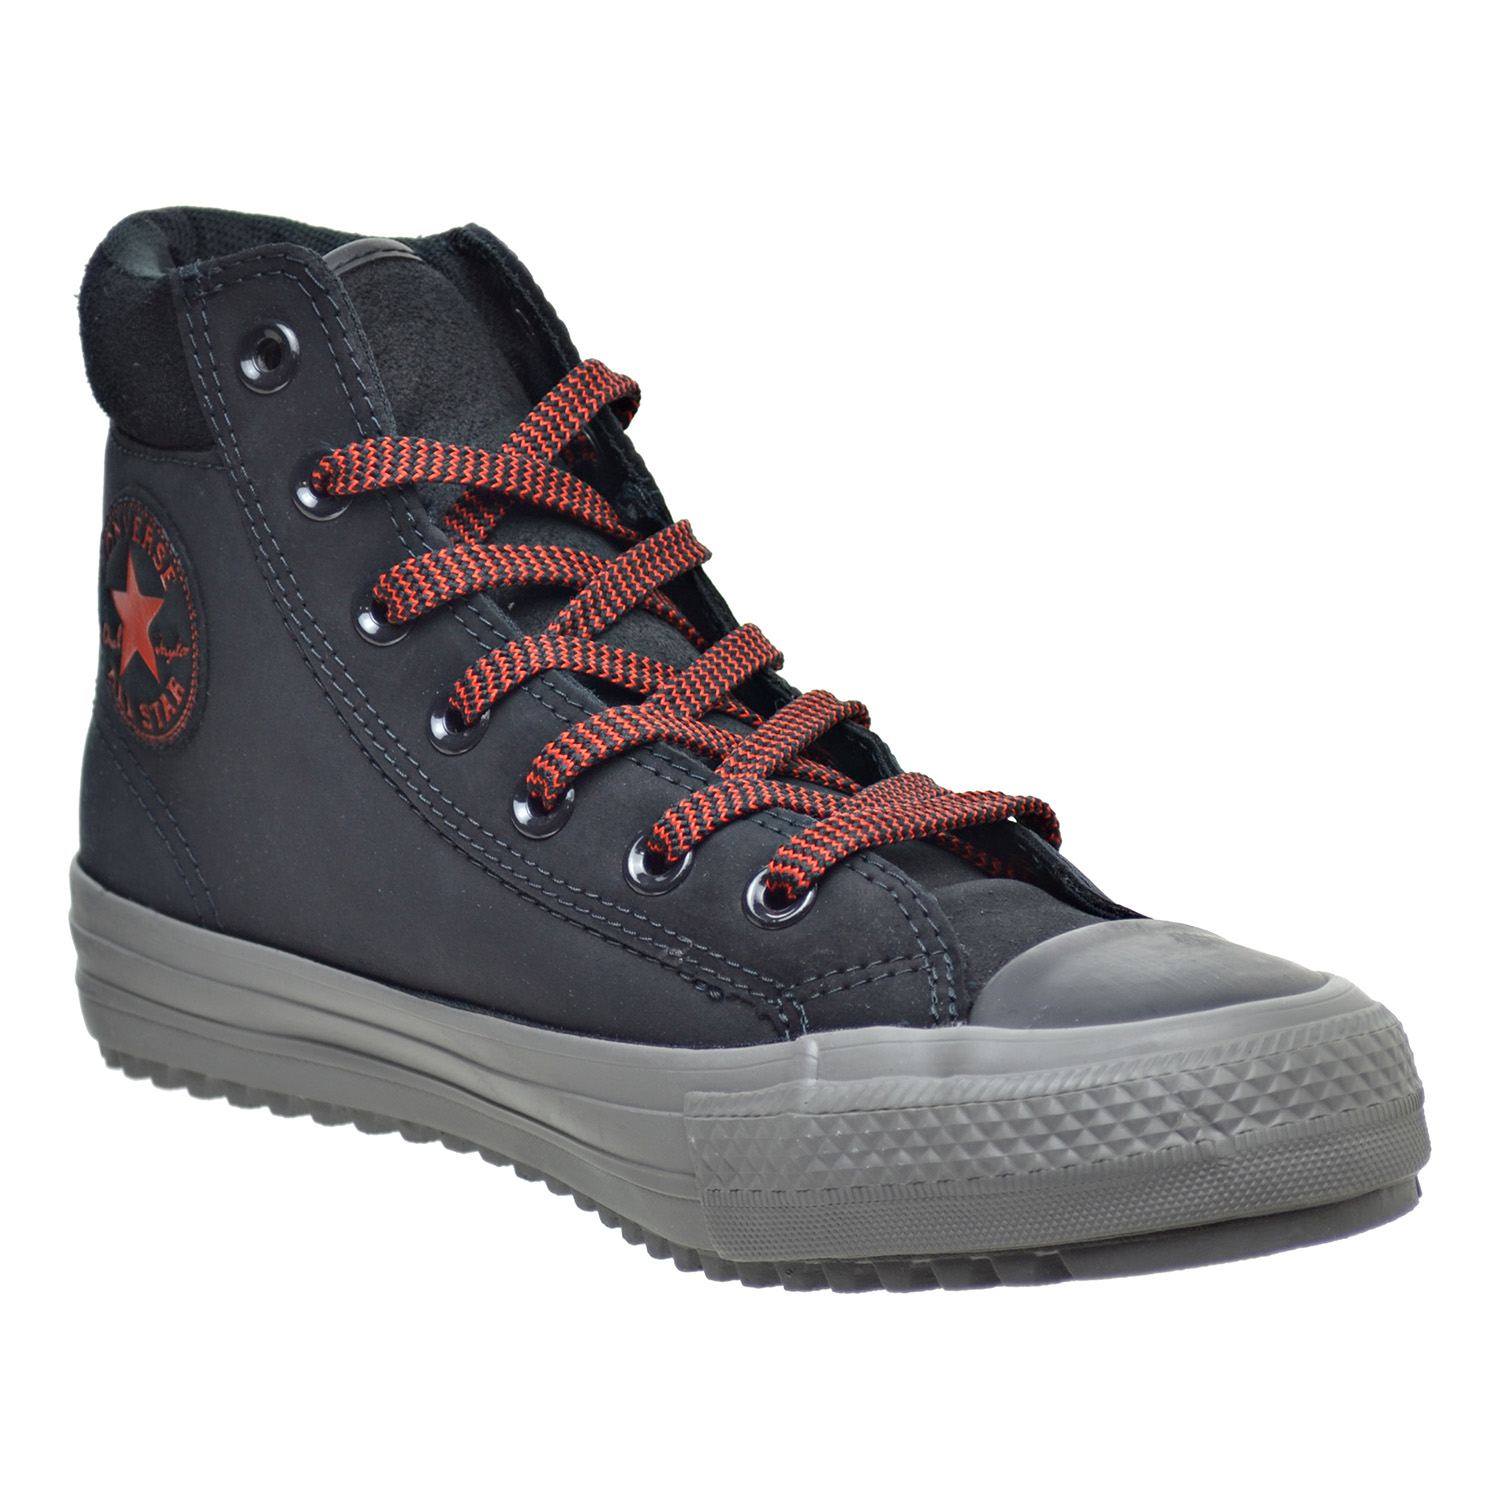 Converse Chuck Taylor All Star PC High Top Unisex Boots Black/Charcoal Grey/Signal Red 153672c - image 2 of 6